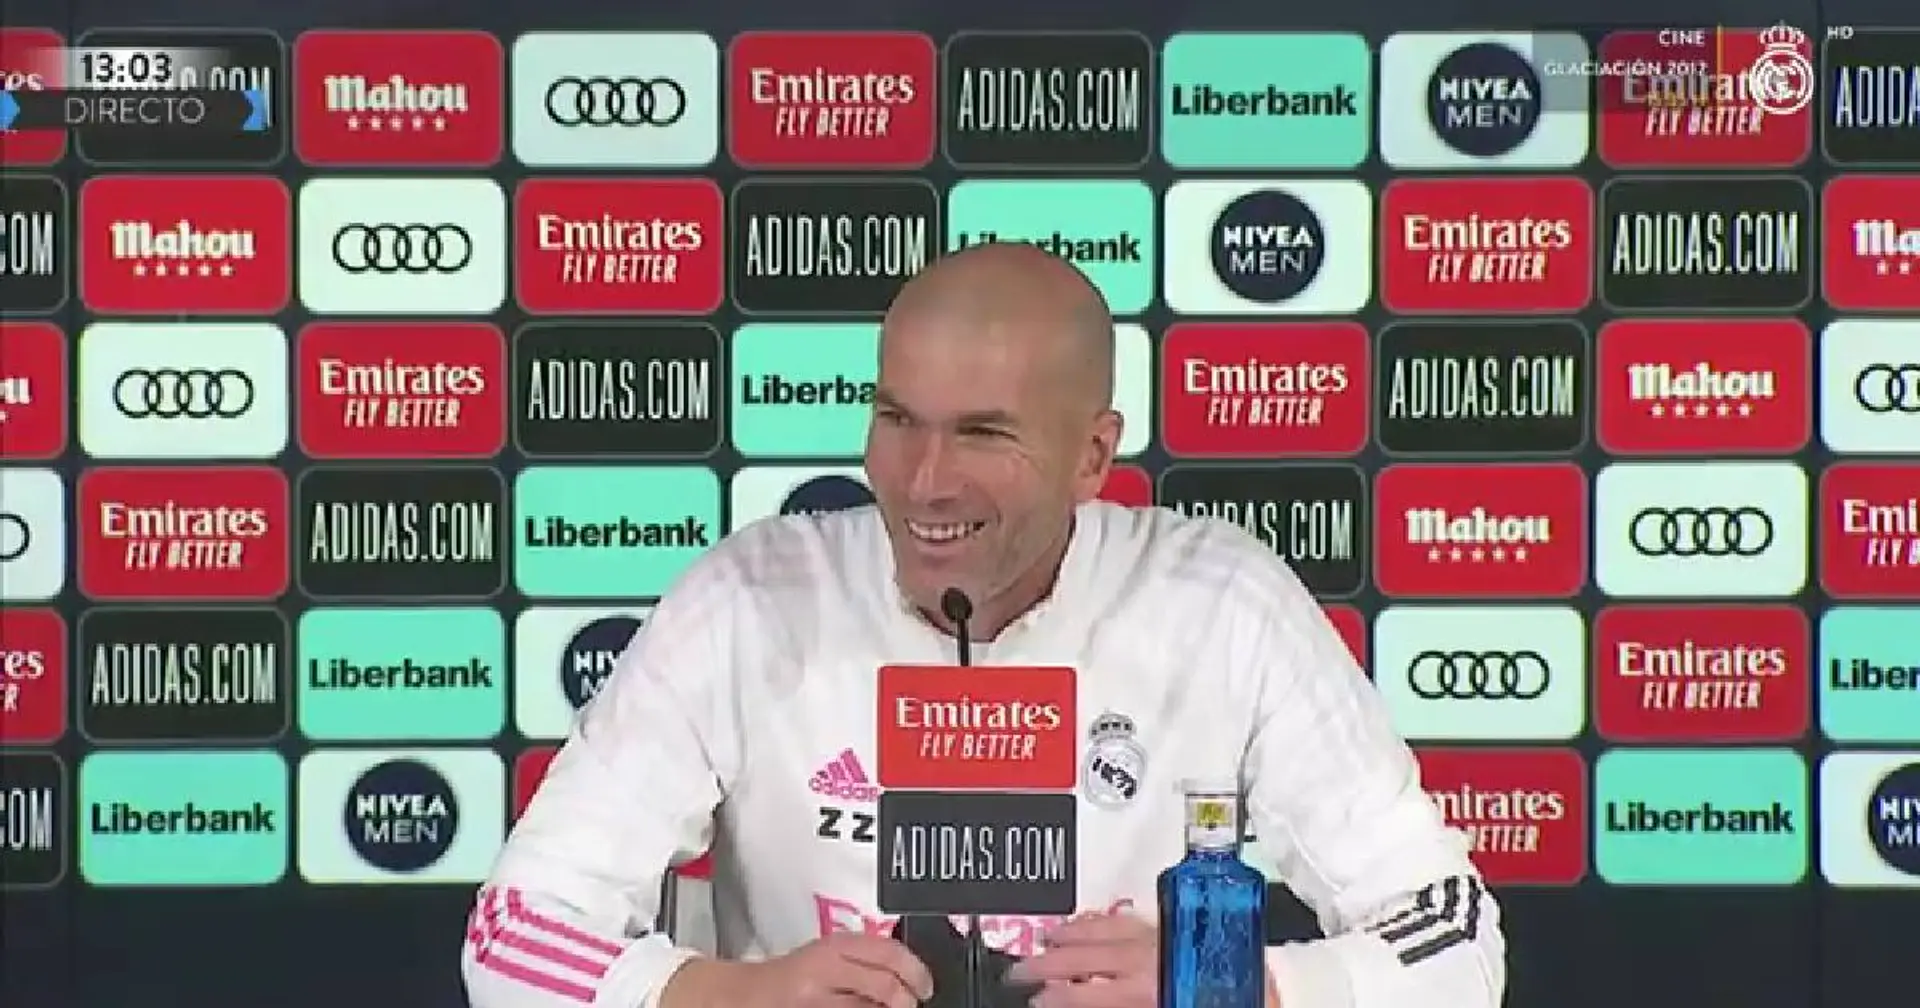 'If I rotate you ask why, if I don't then you ask me why not': Zidane